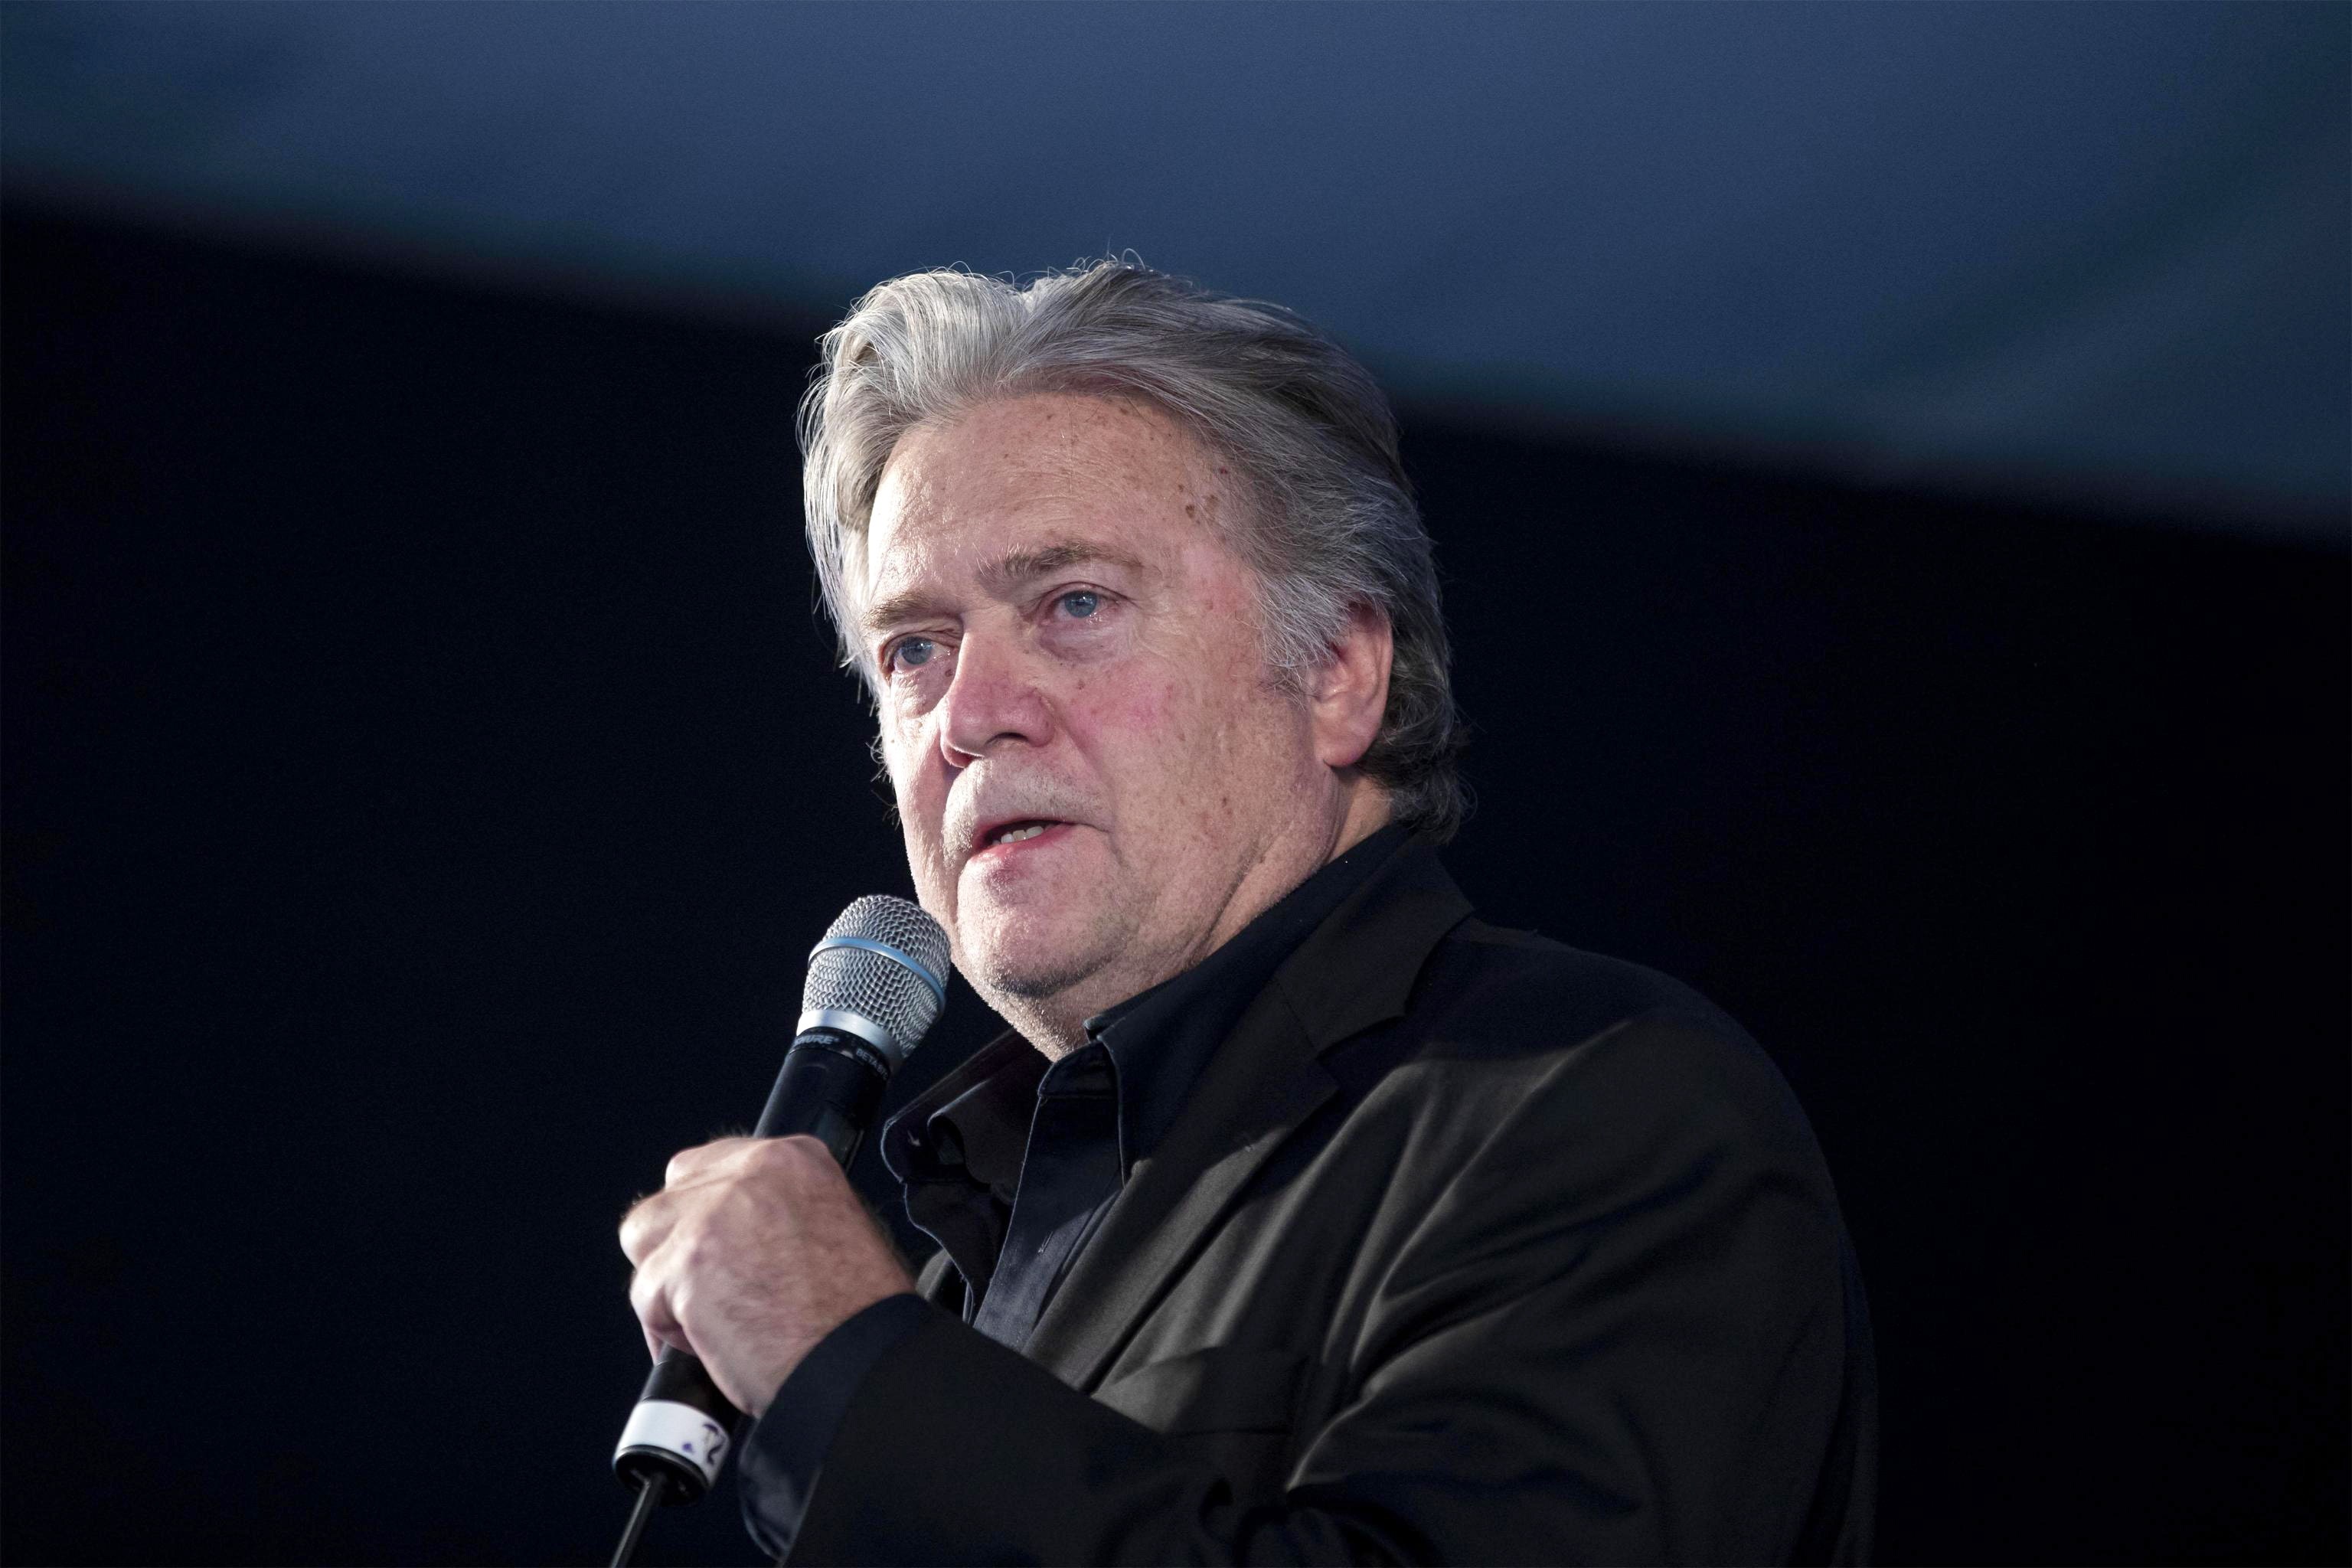 Former White House strategist Steve Bannon addresses the Youth Festival of the right-wing Brothers of Italy party in Rome in September. Photo: EPA-EFE